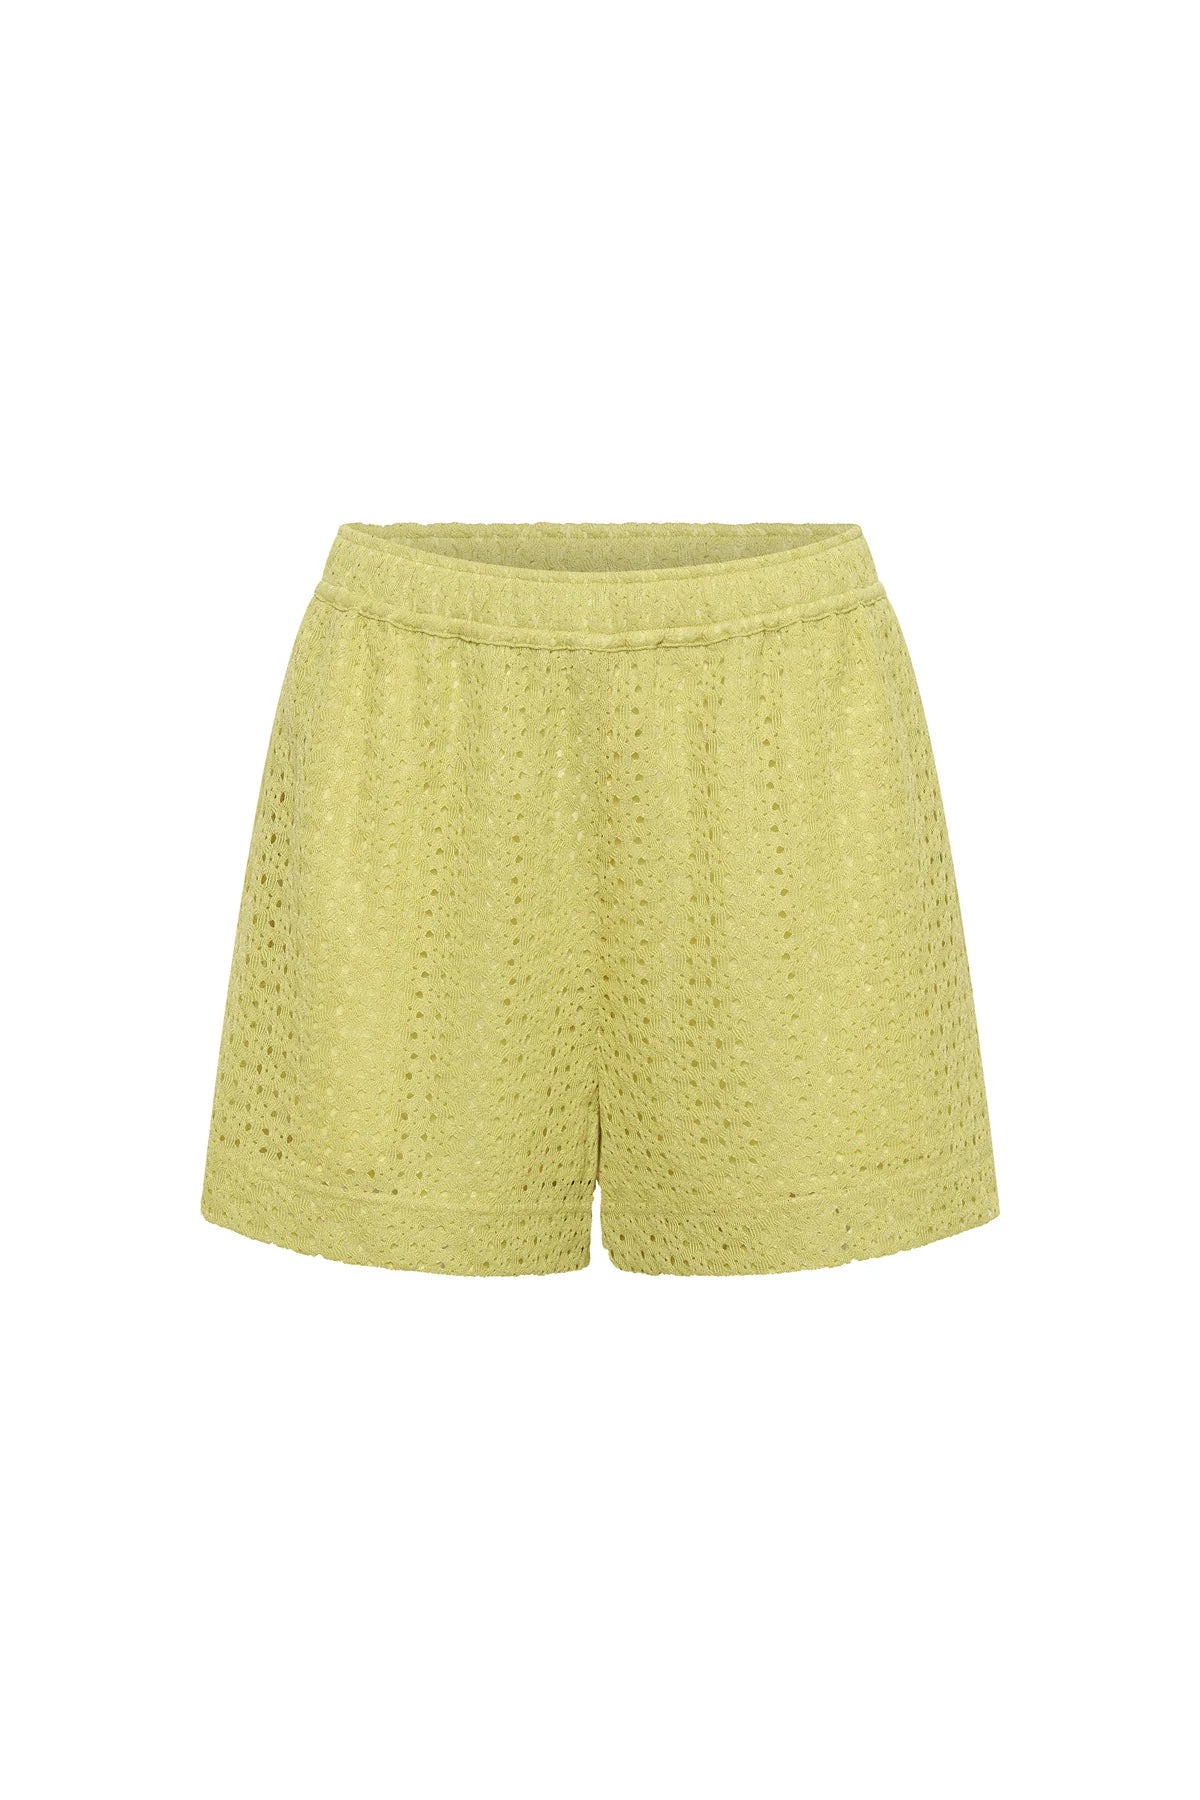 Camilla and Marc Agna Lace Shorts - Pale Lime